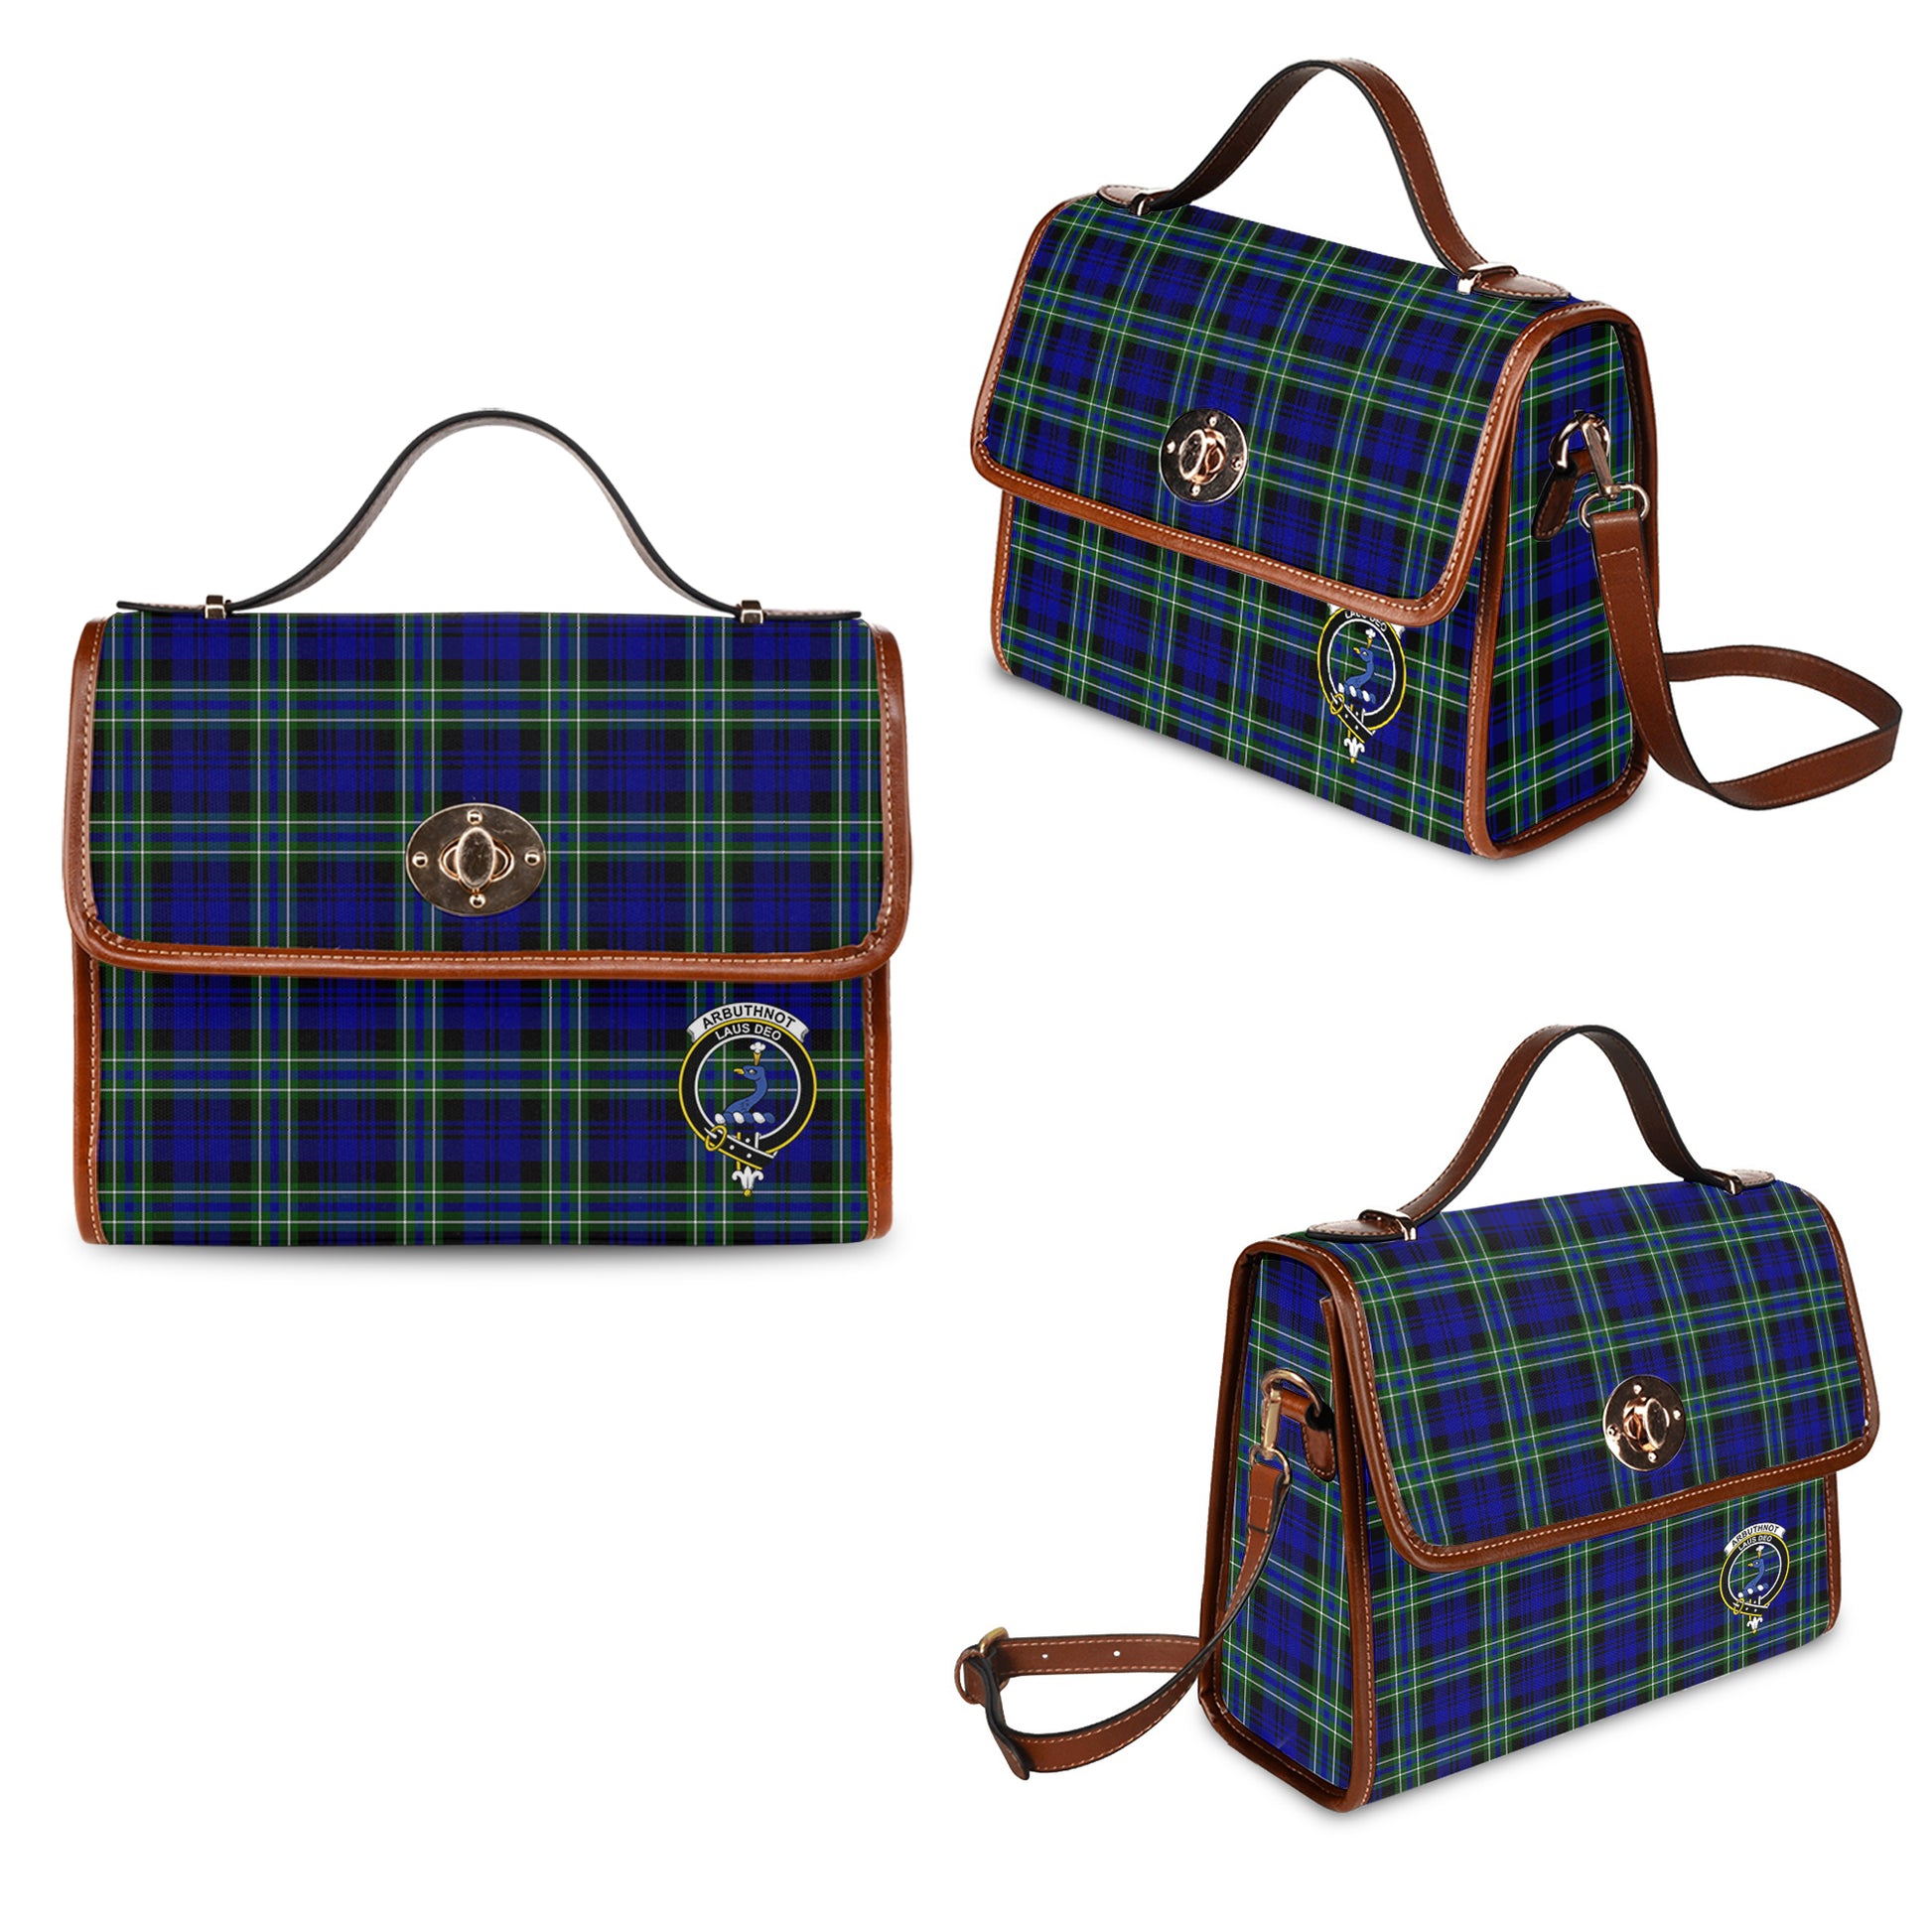 Arbuthnot Modern Tartan Leather Strap Waterproof Canvas Bag with Family Crest One Size 34cm * 42cm (13.4" x 16.5") - Tartanvibesclothing